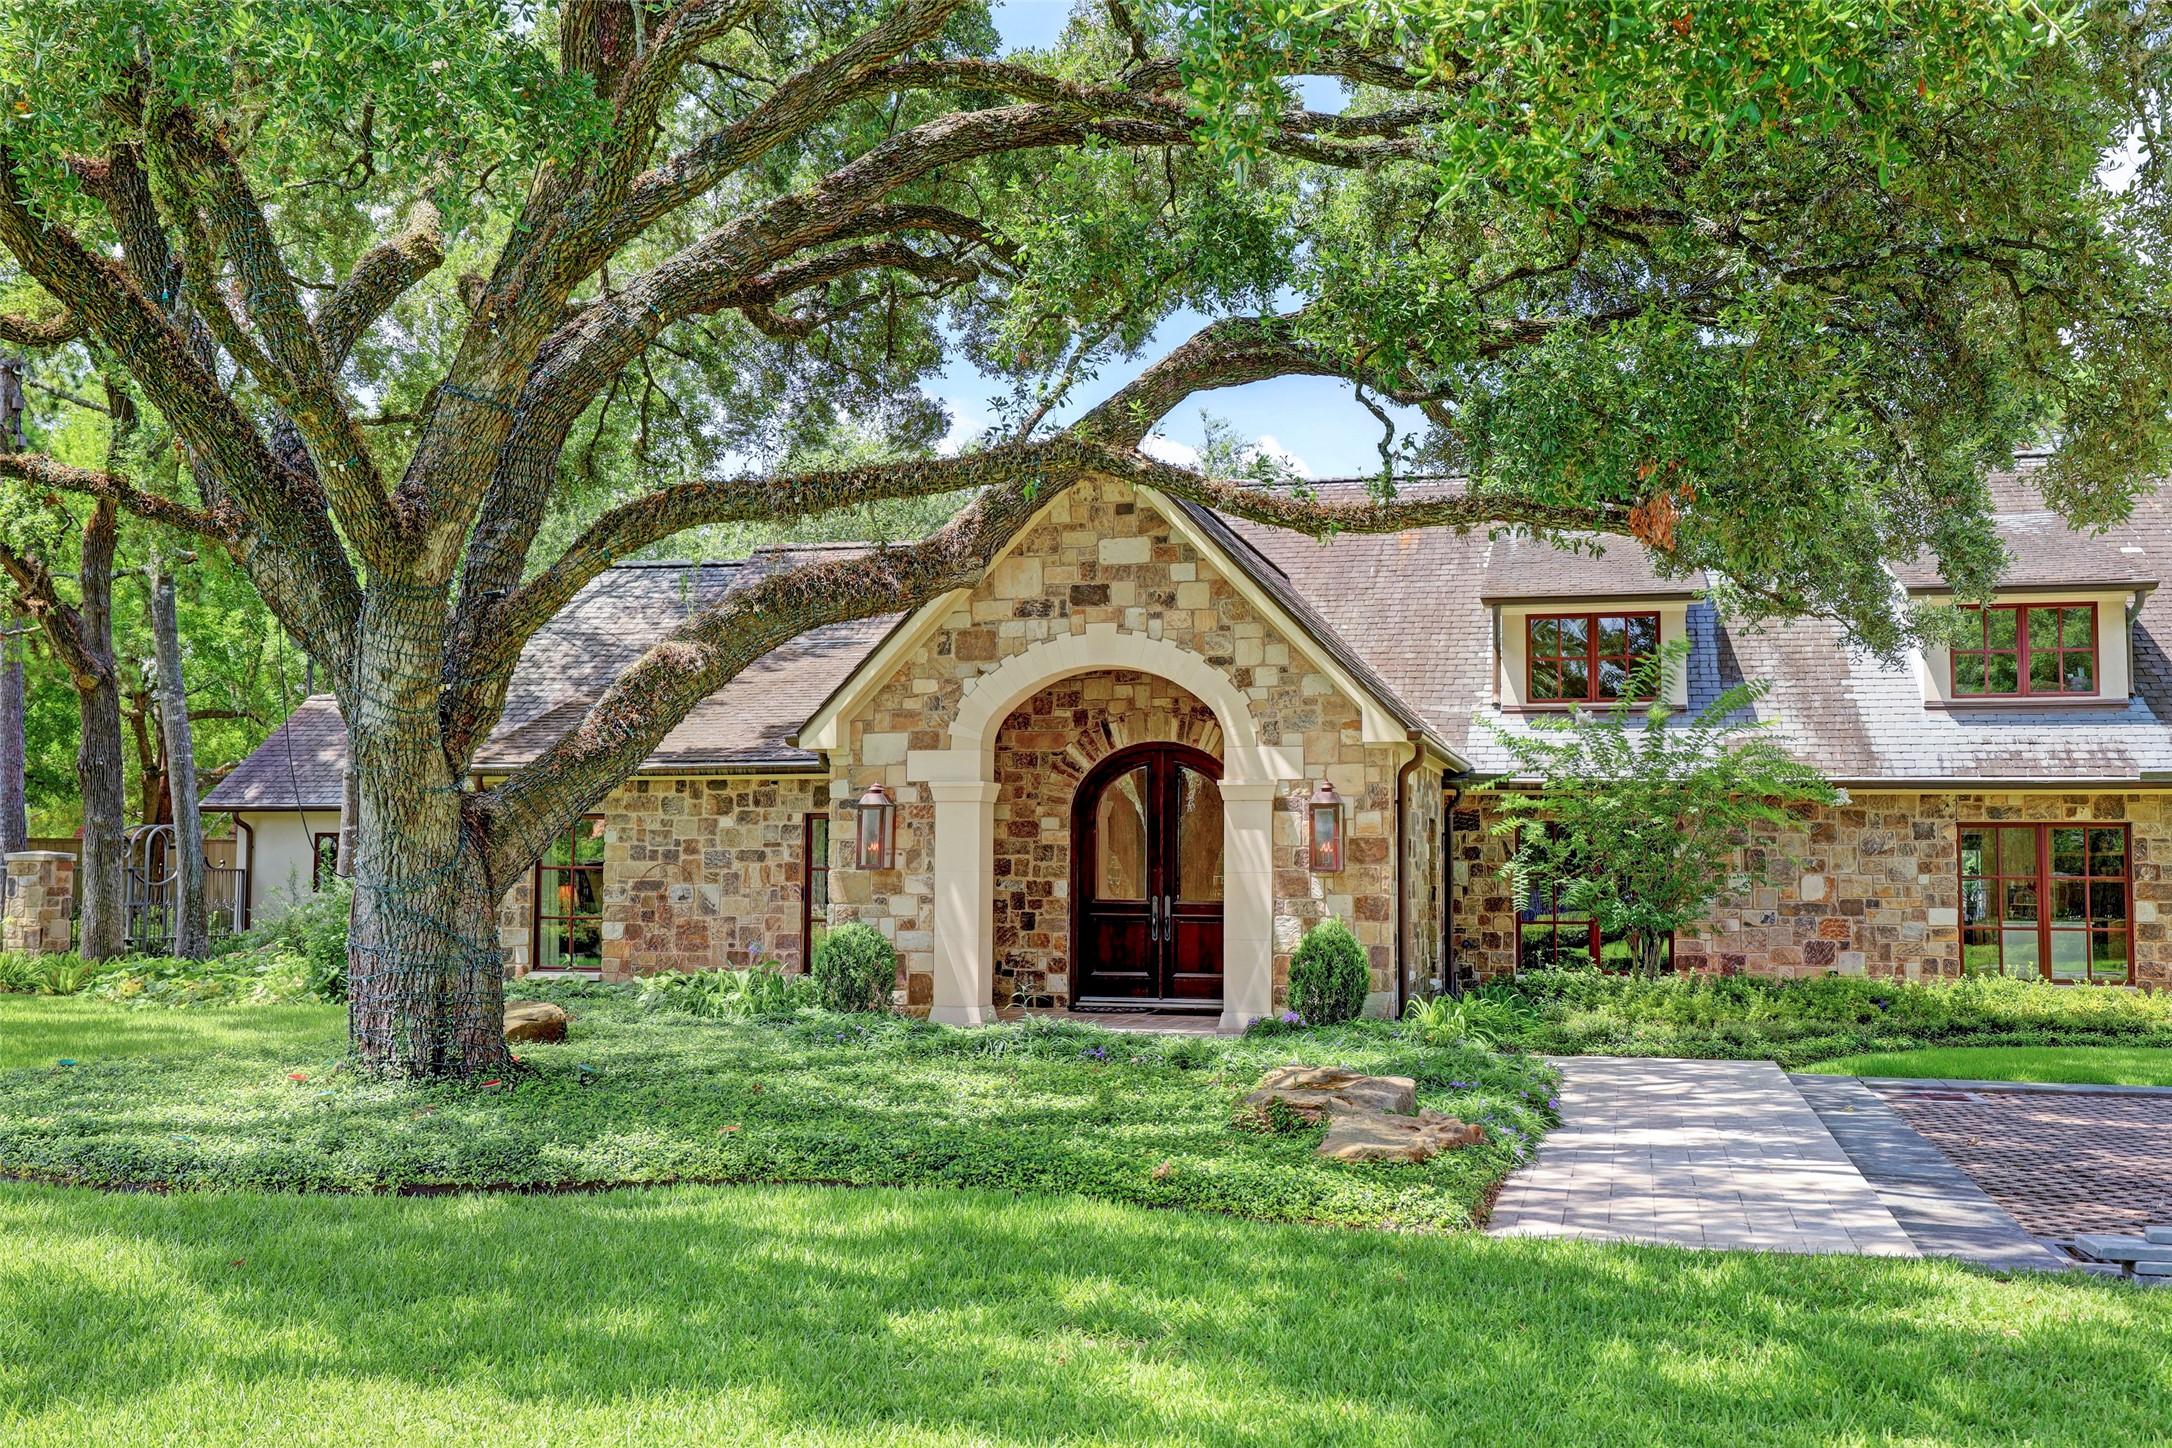 Lovely front entry with large covered porch.
